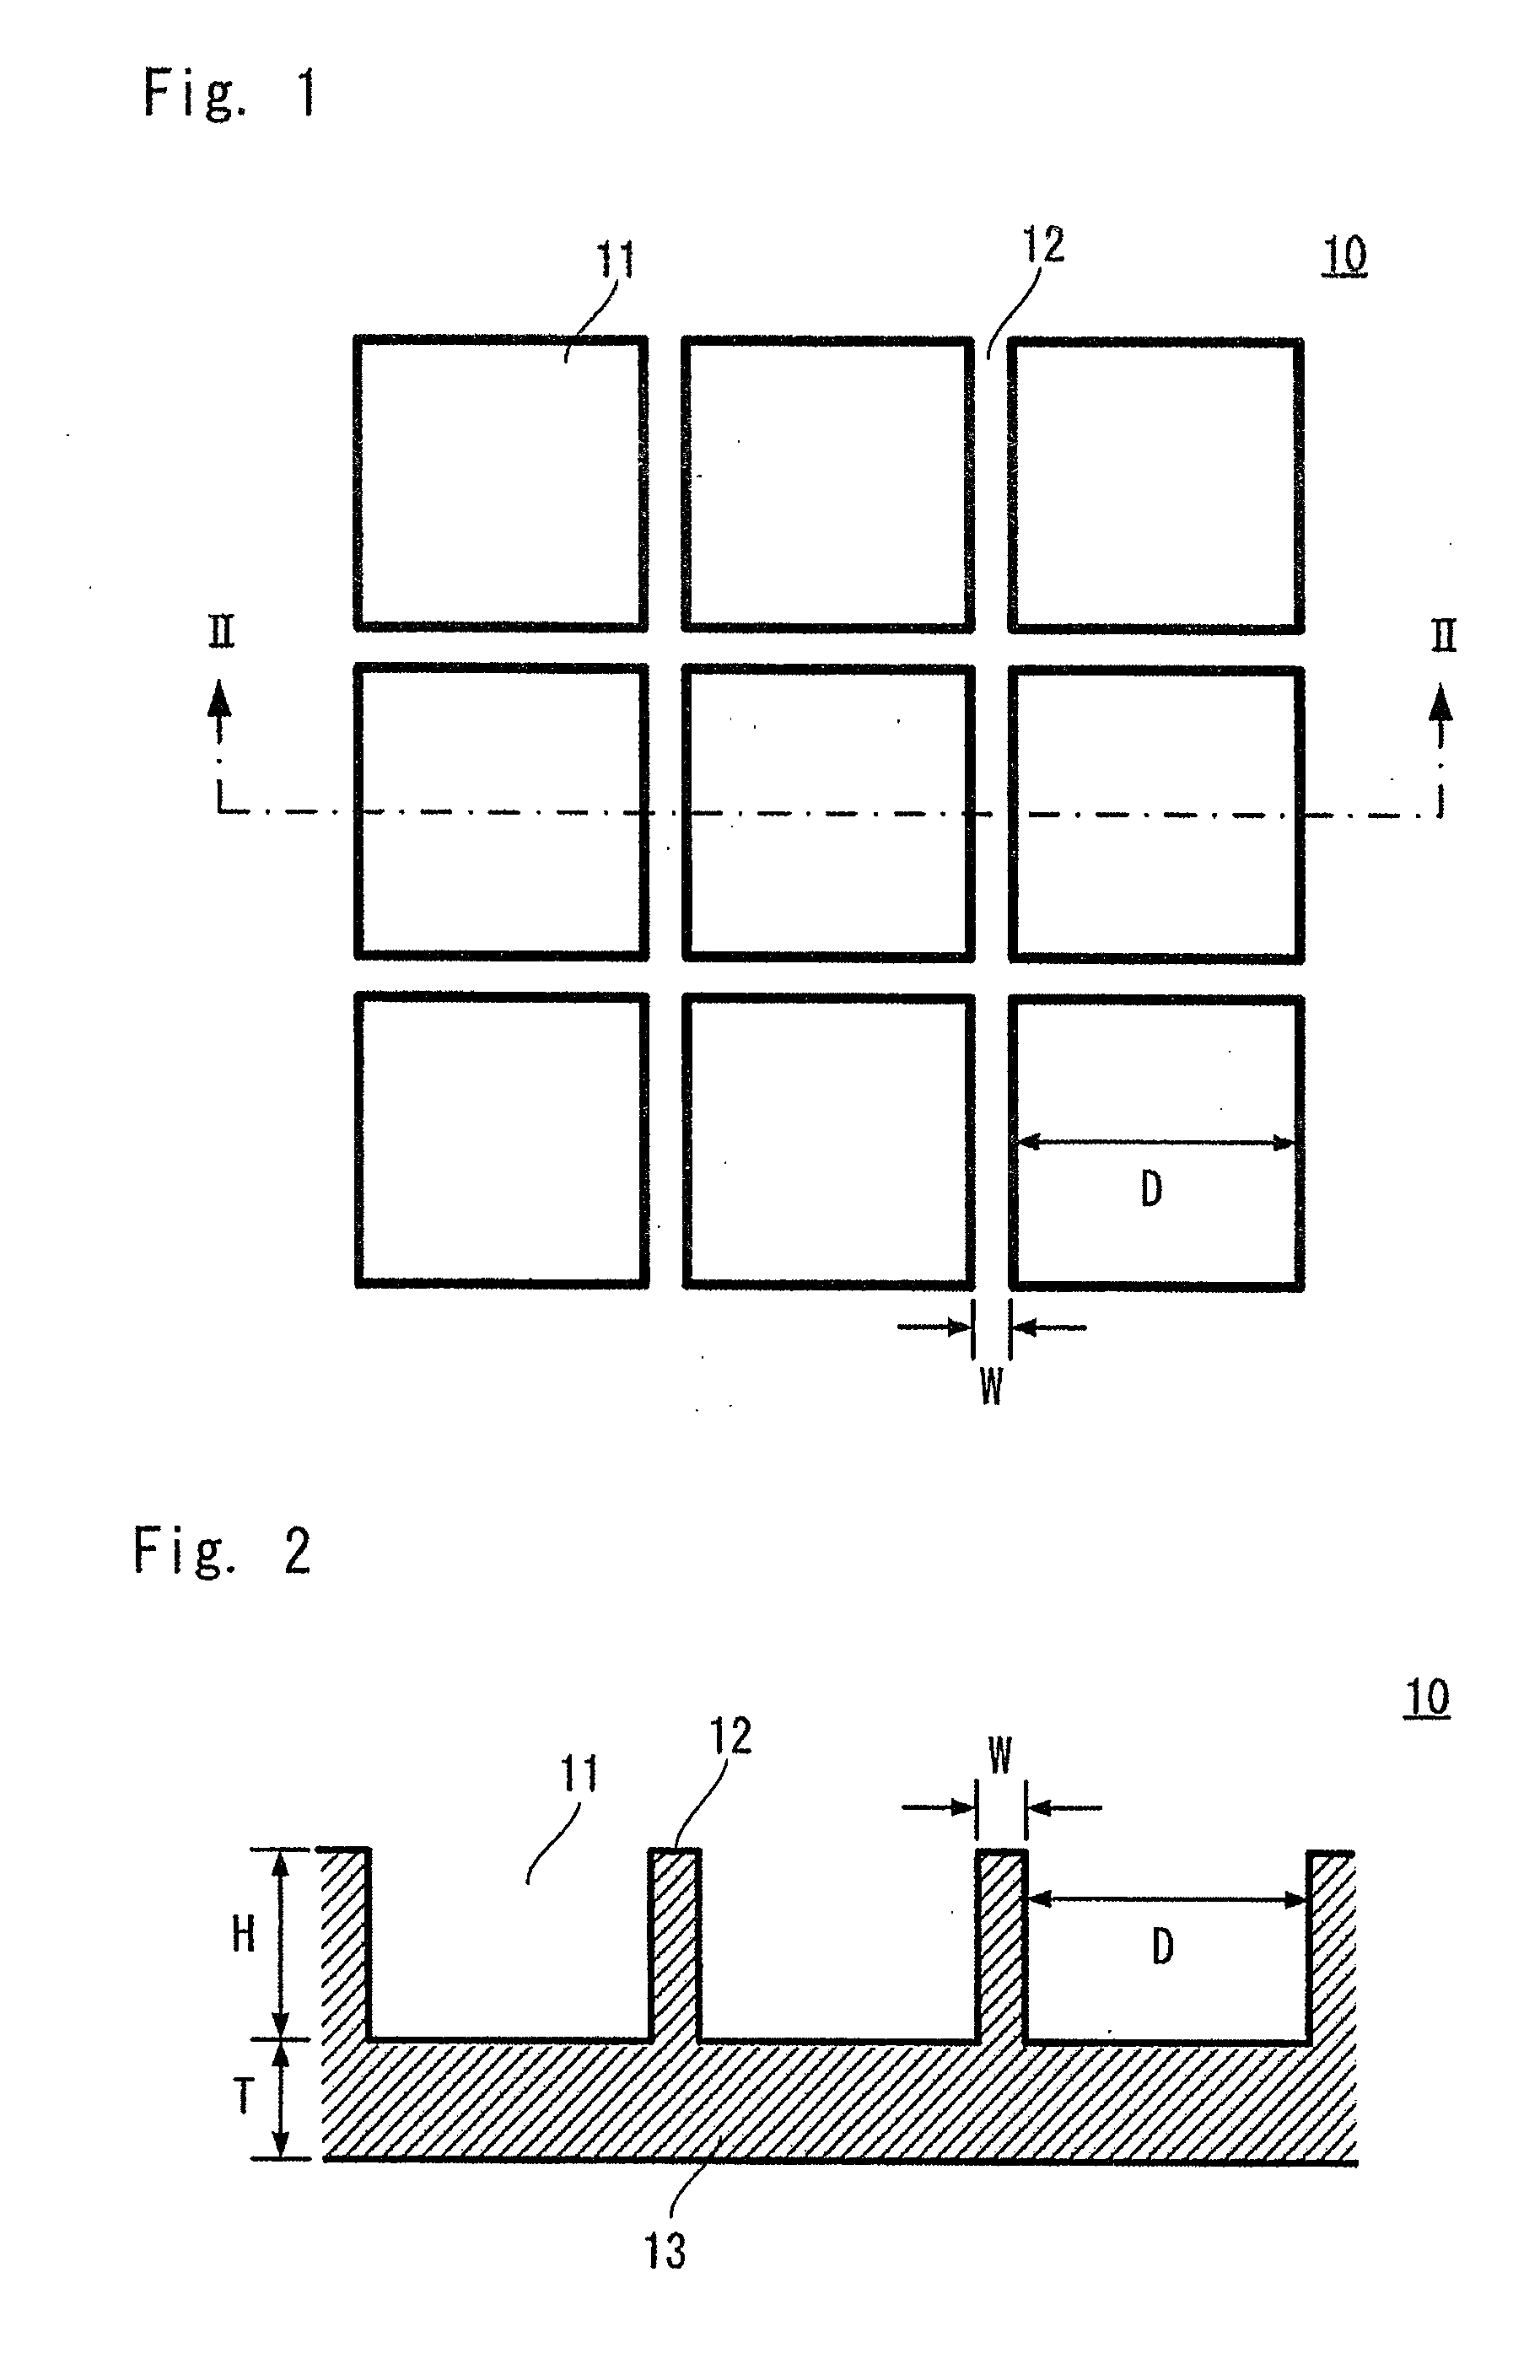 Adherent cell culture method